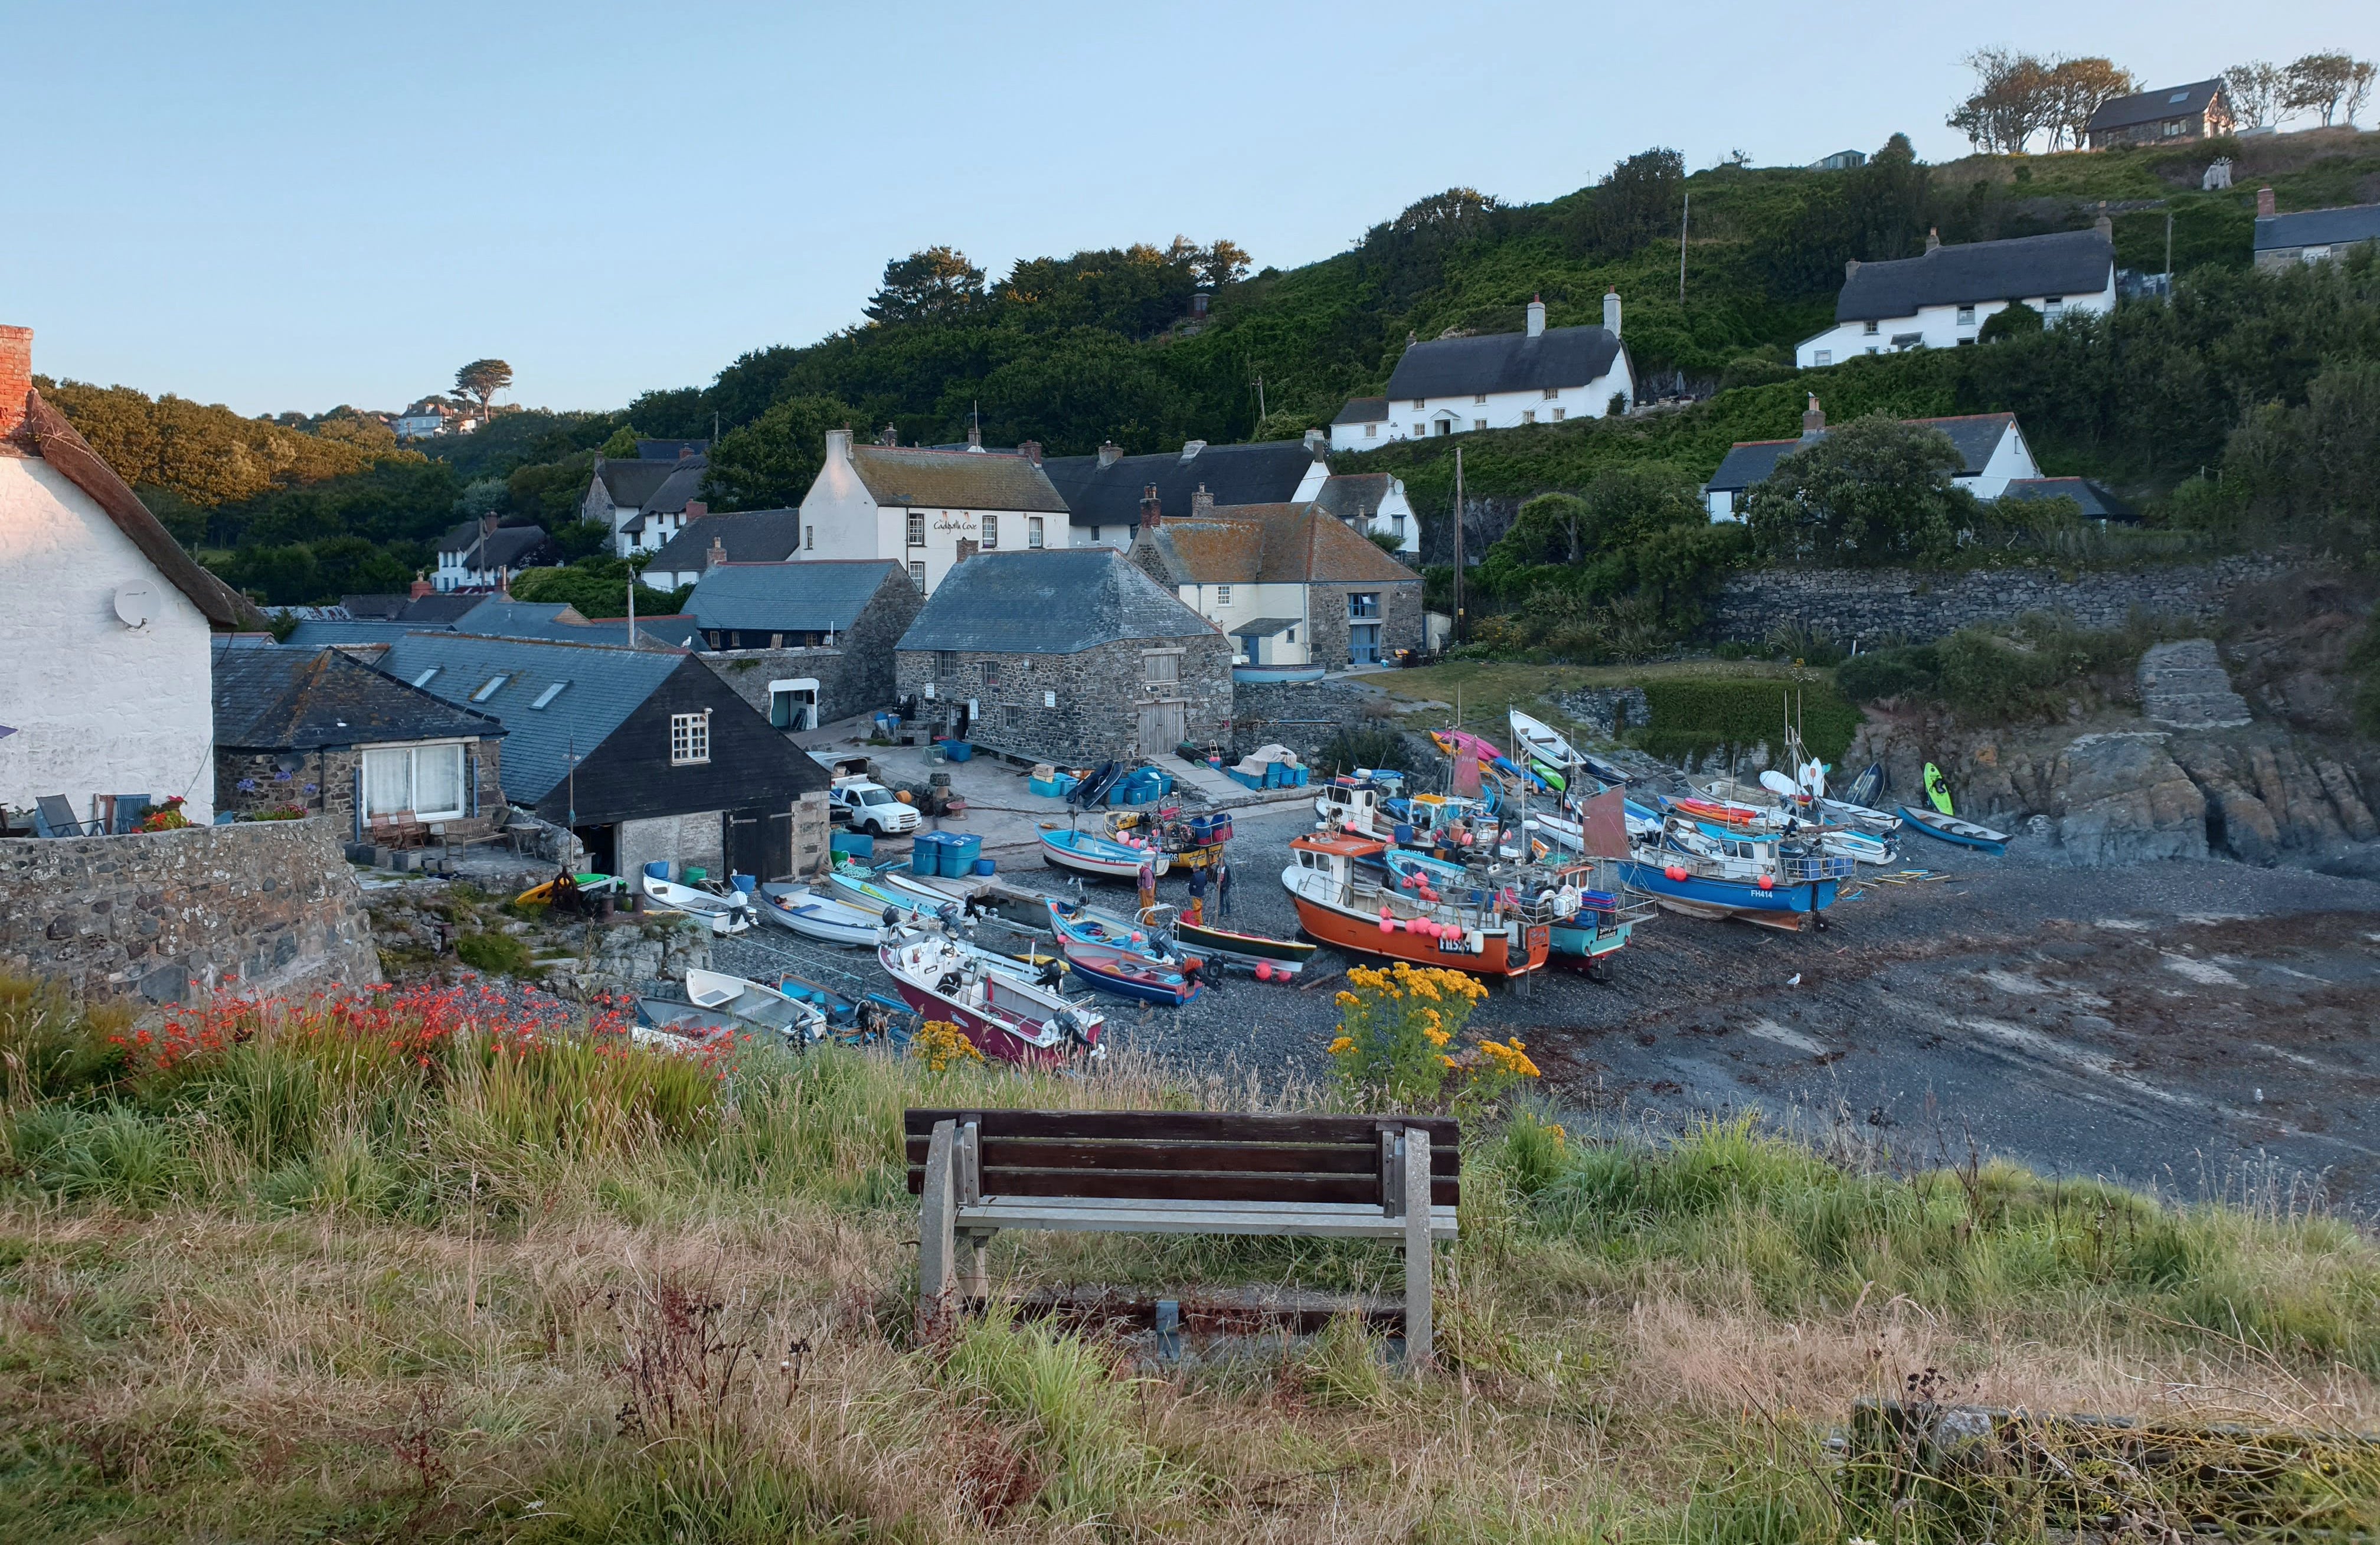 The Cadgwith Fishing Cove Trust has started a crowdfunding appeal to raise money towards the purchase of the black and stone buildings in the centre of the image